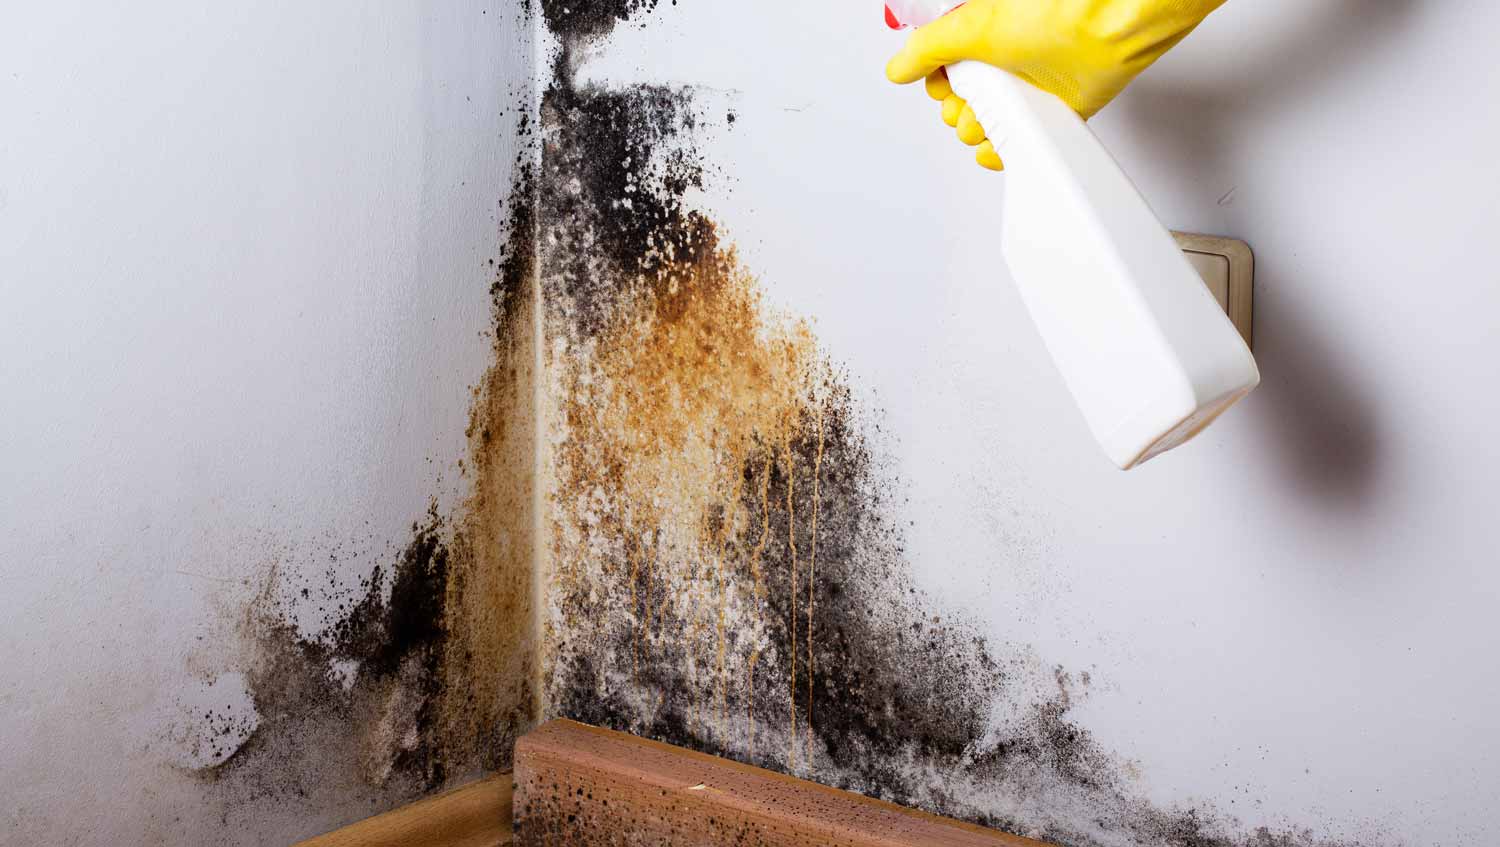 Mold Remediation & Mold Removal in Wilmington and beyond.